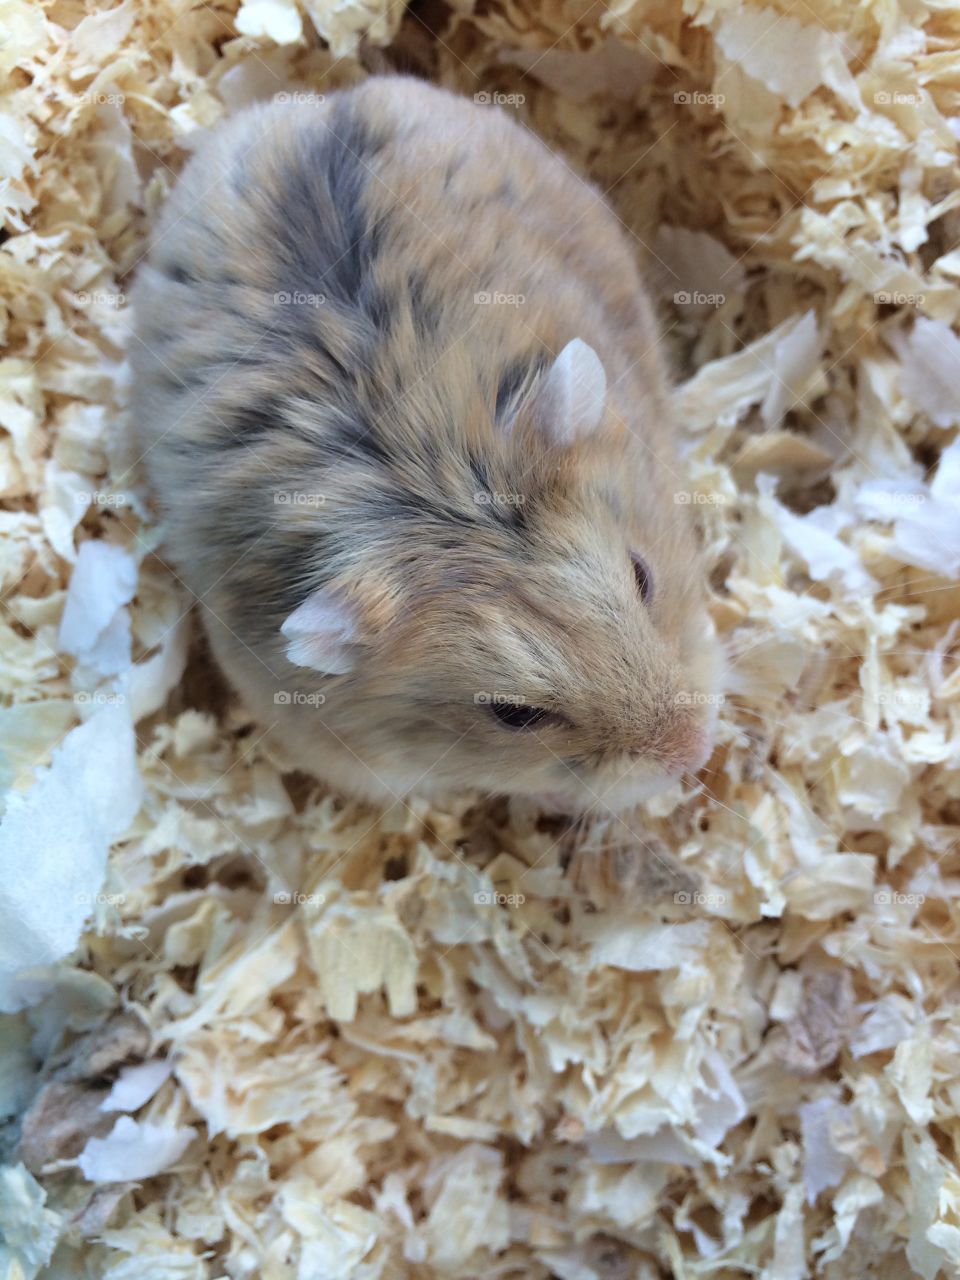 Foraging Hamster. Hamster looking all sweet this morning.
